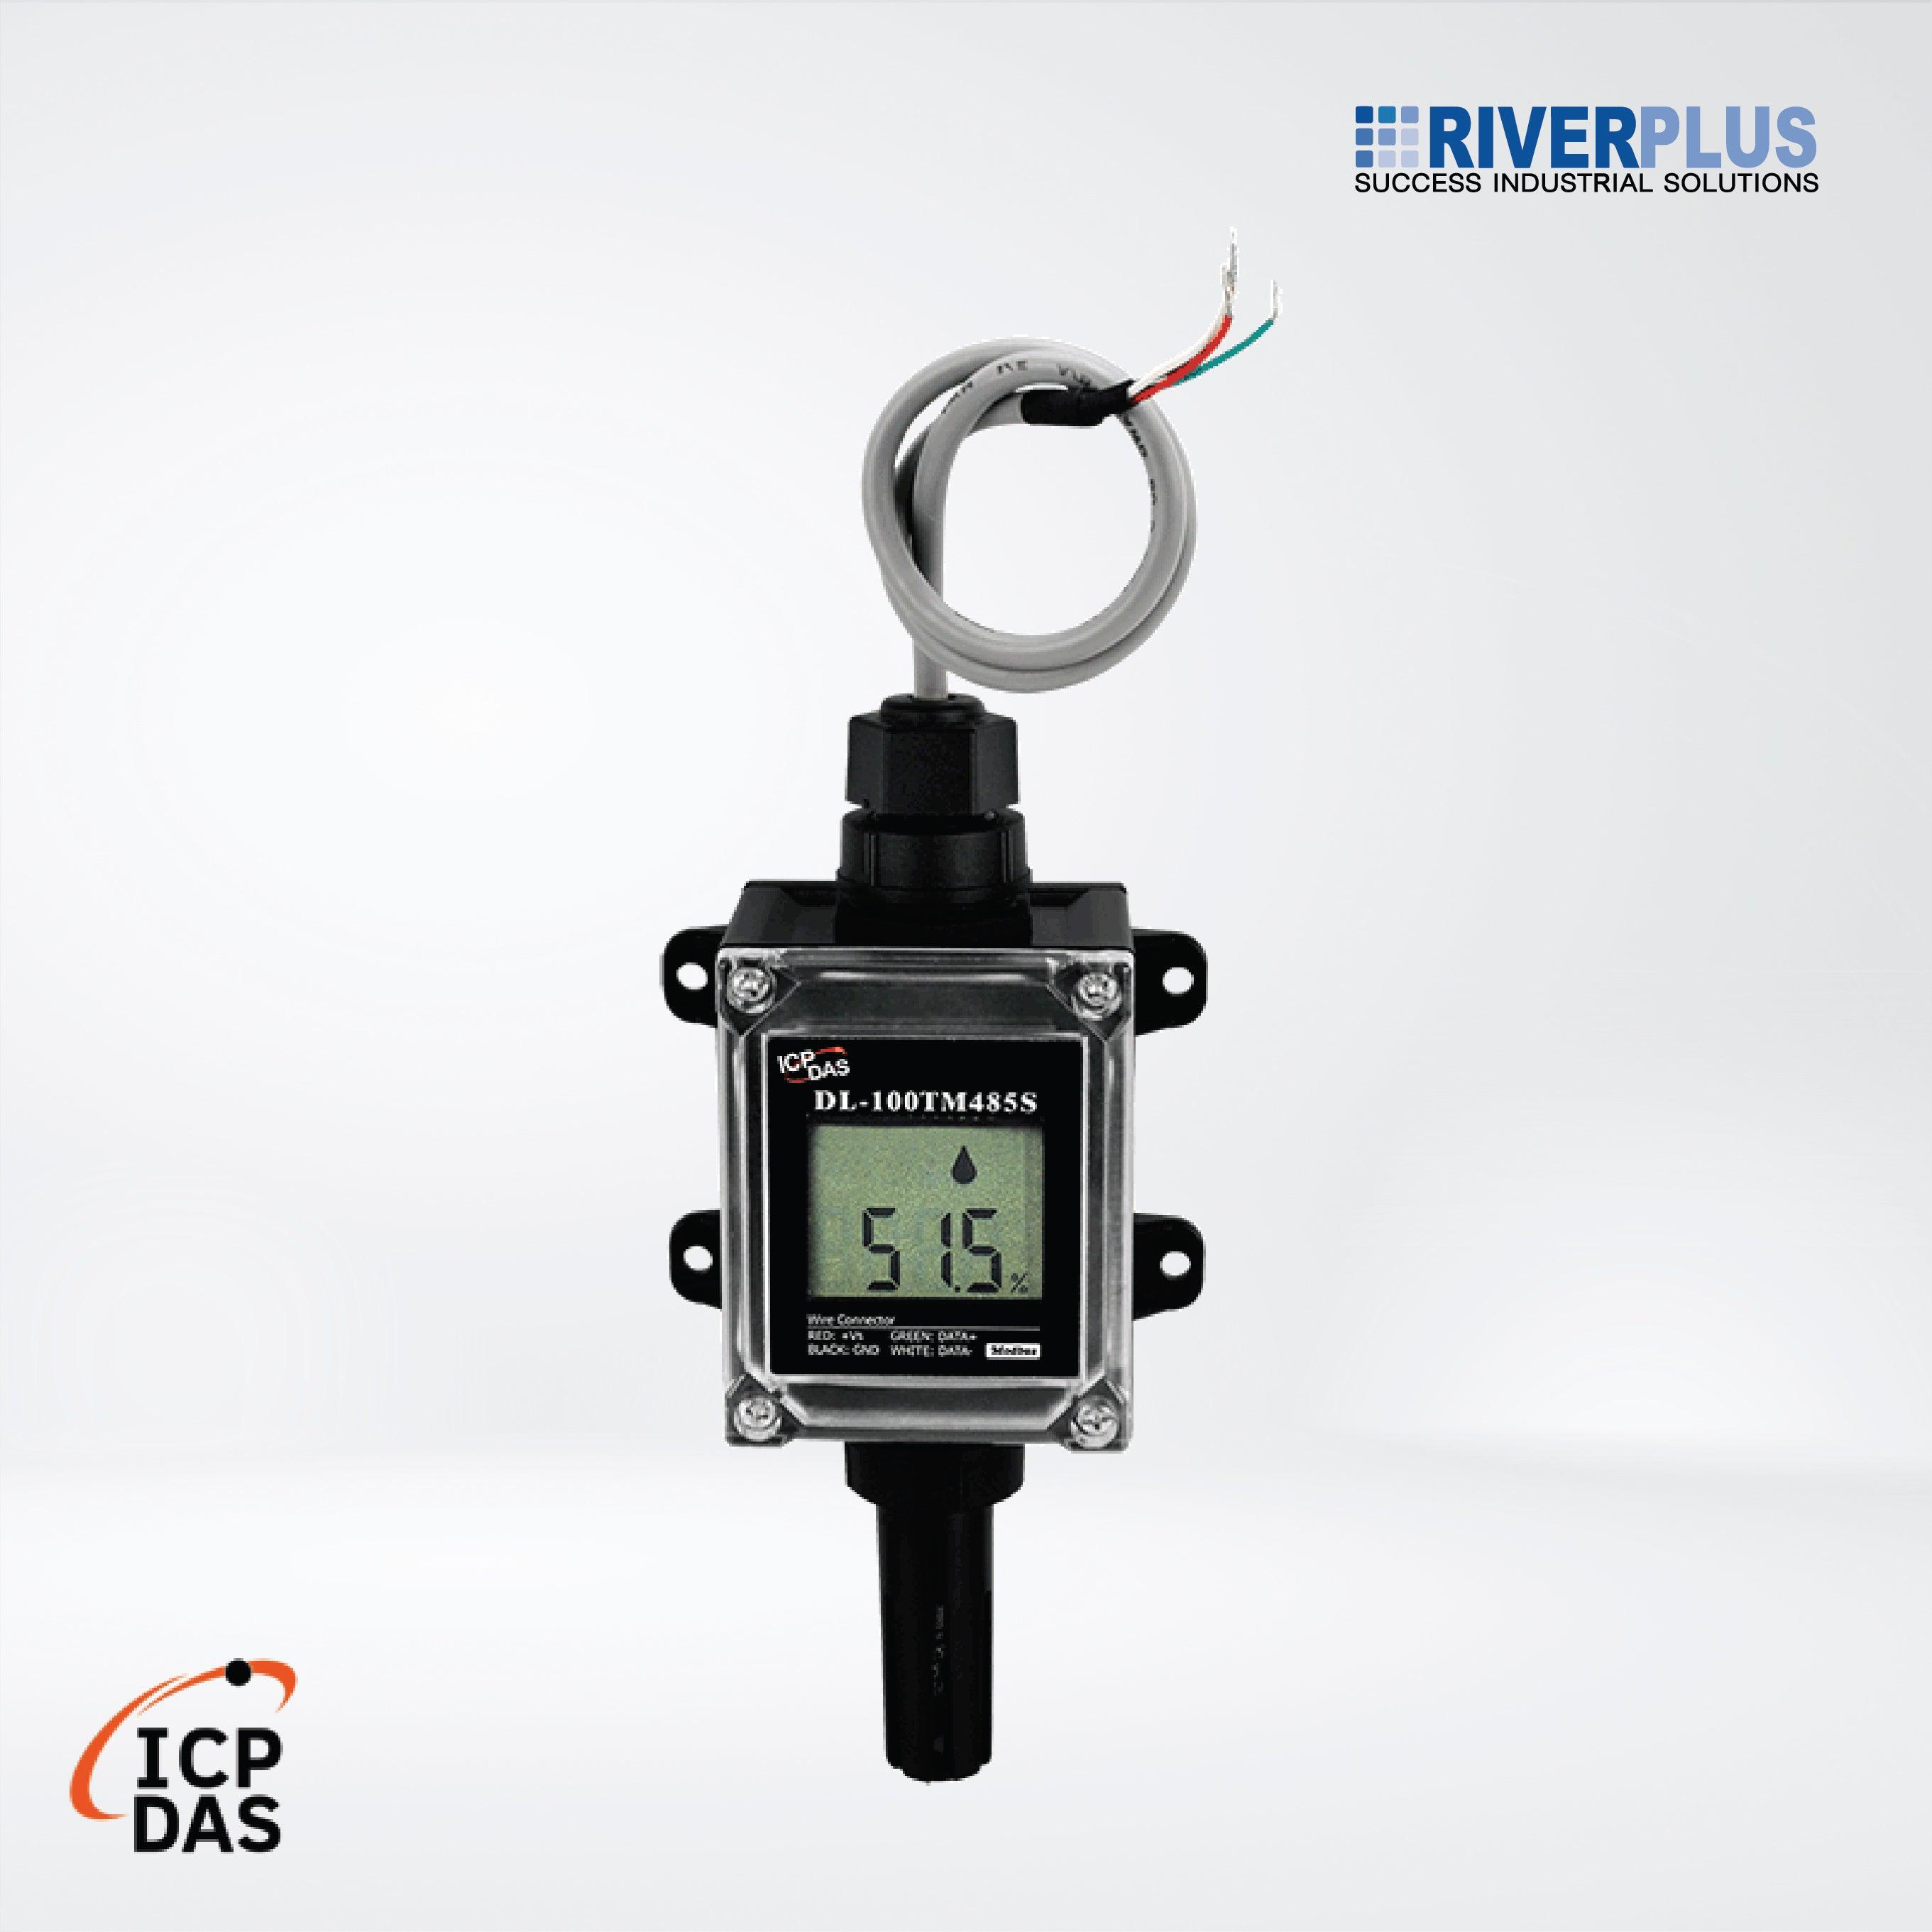 DL-100TM485S IP66 Remote Temperature and Humidity Data Logger with LCD Display (RS-485) - Riverplus